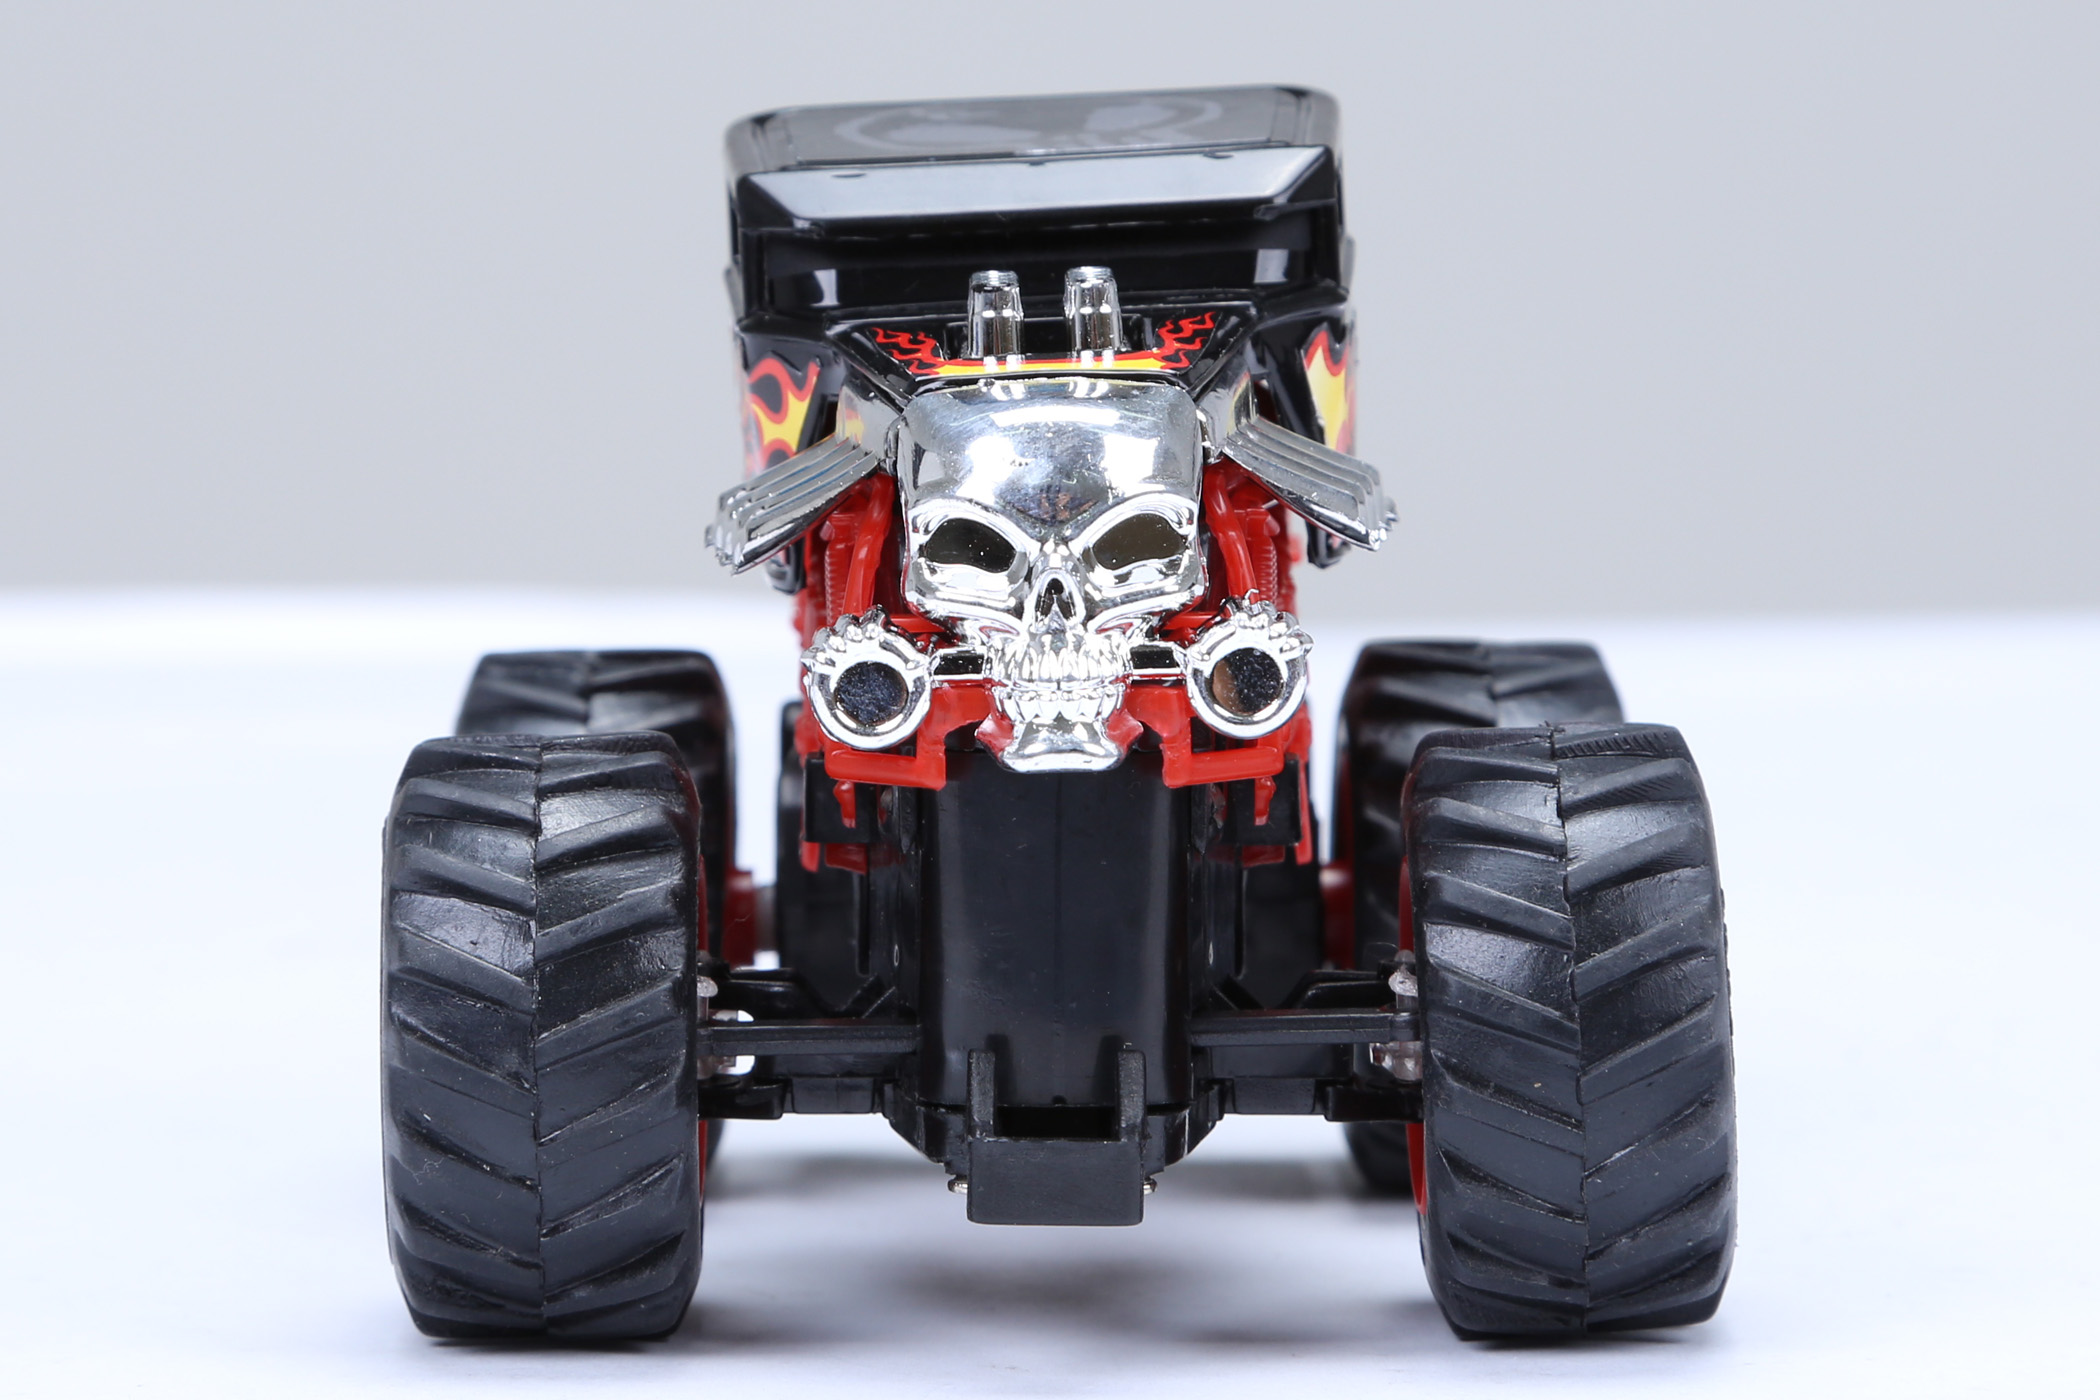 New Bright 1:43 Scale Remote Controlled Bone Shaker Monster Truck Play Vehicle - image 2 of 10